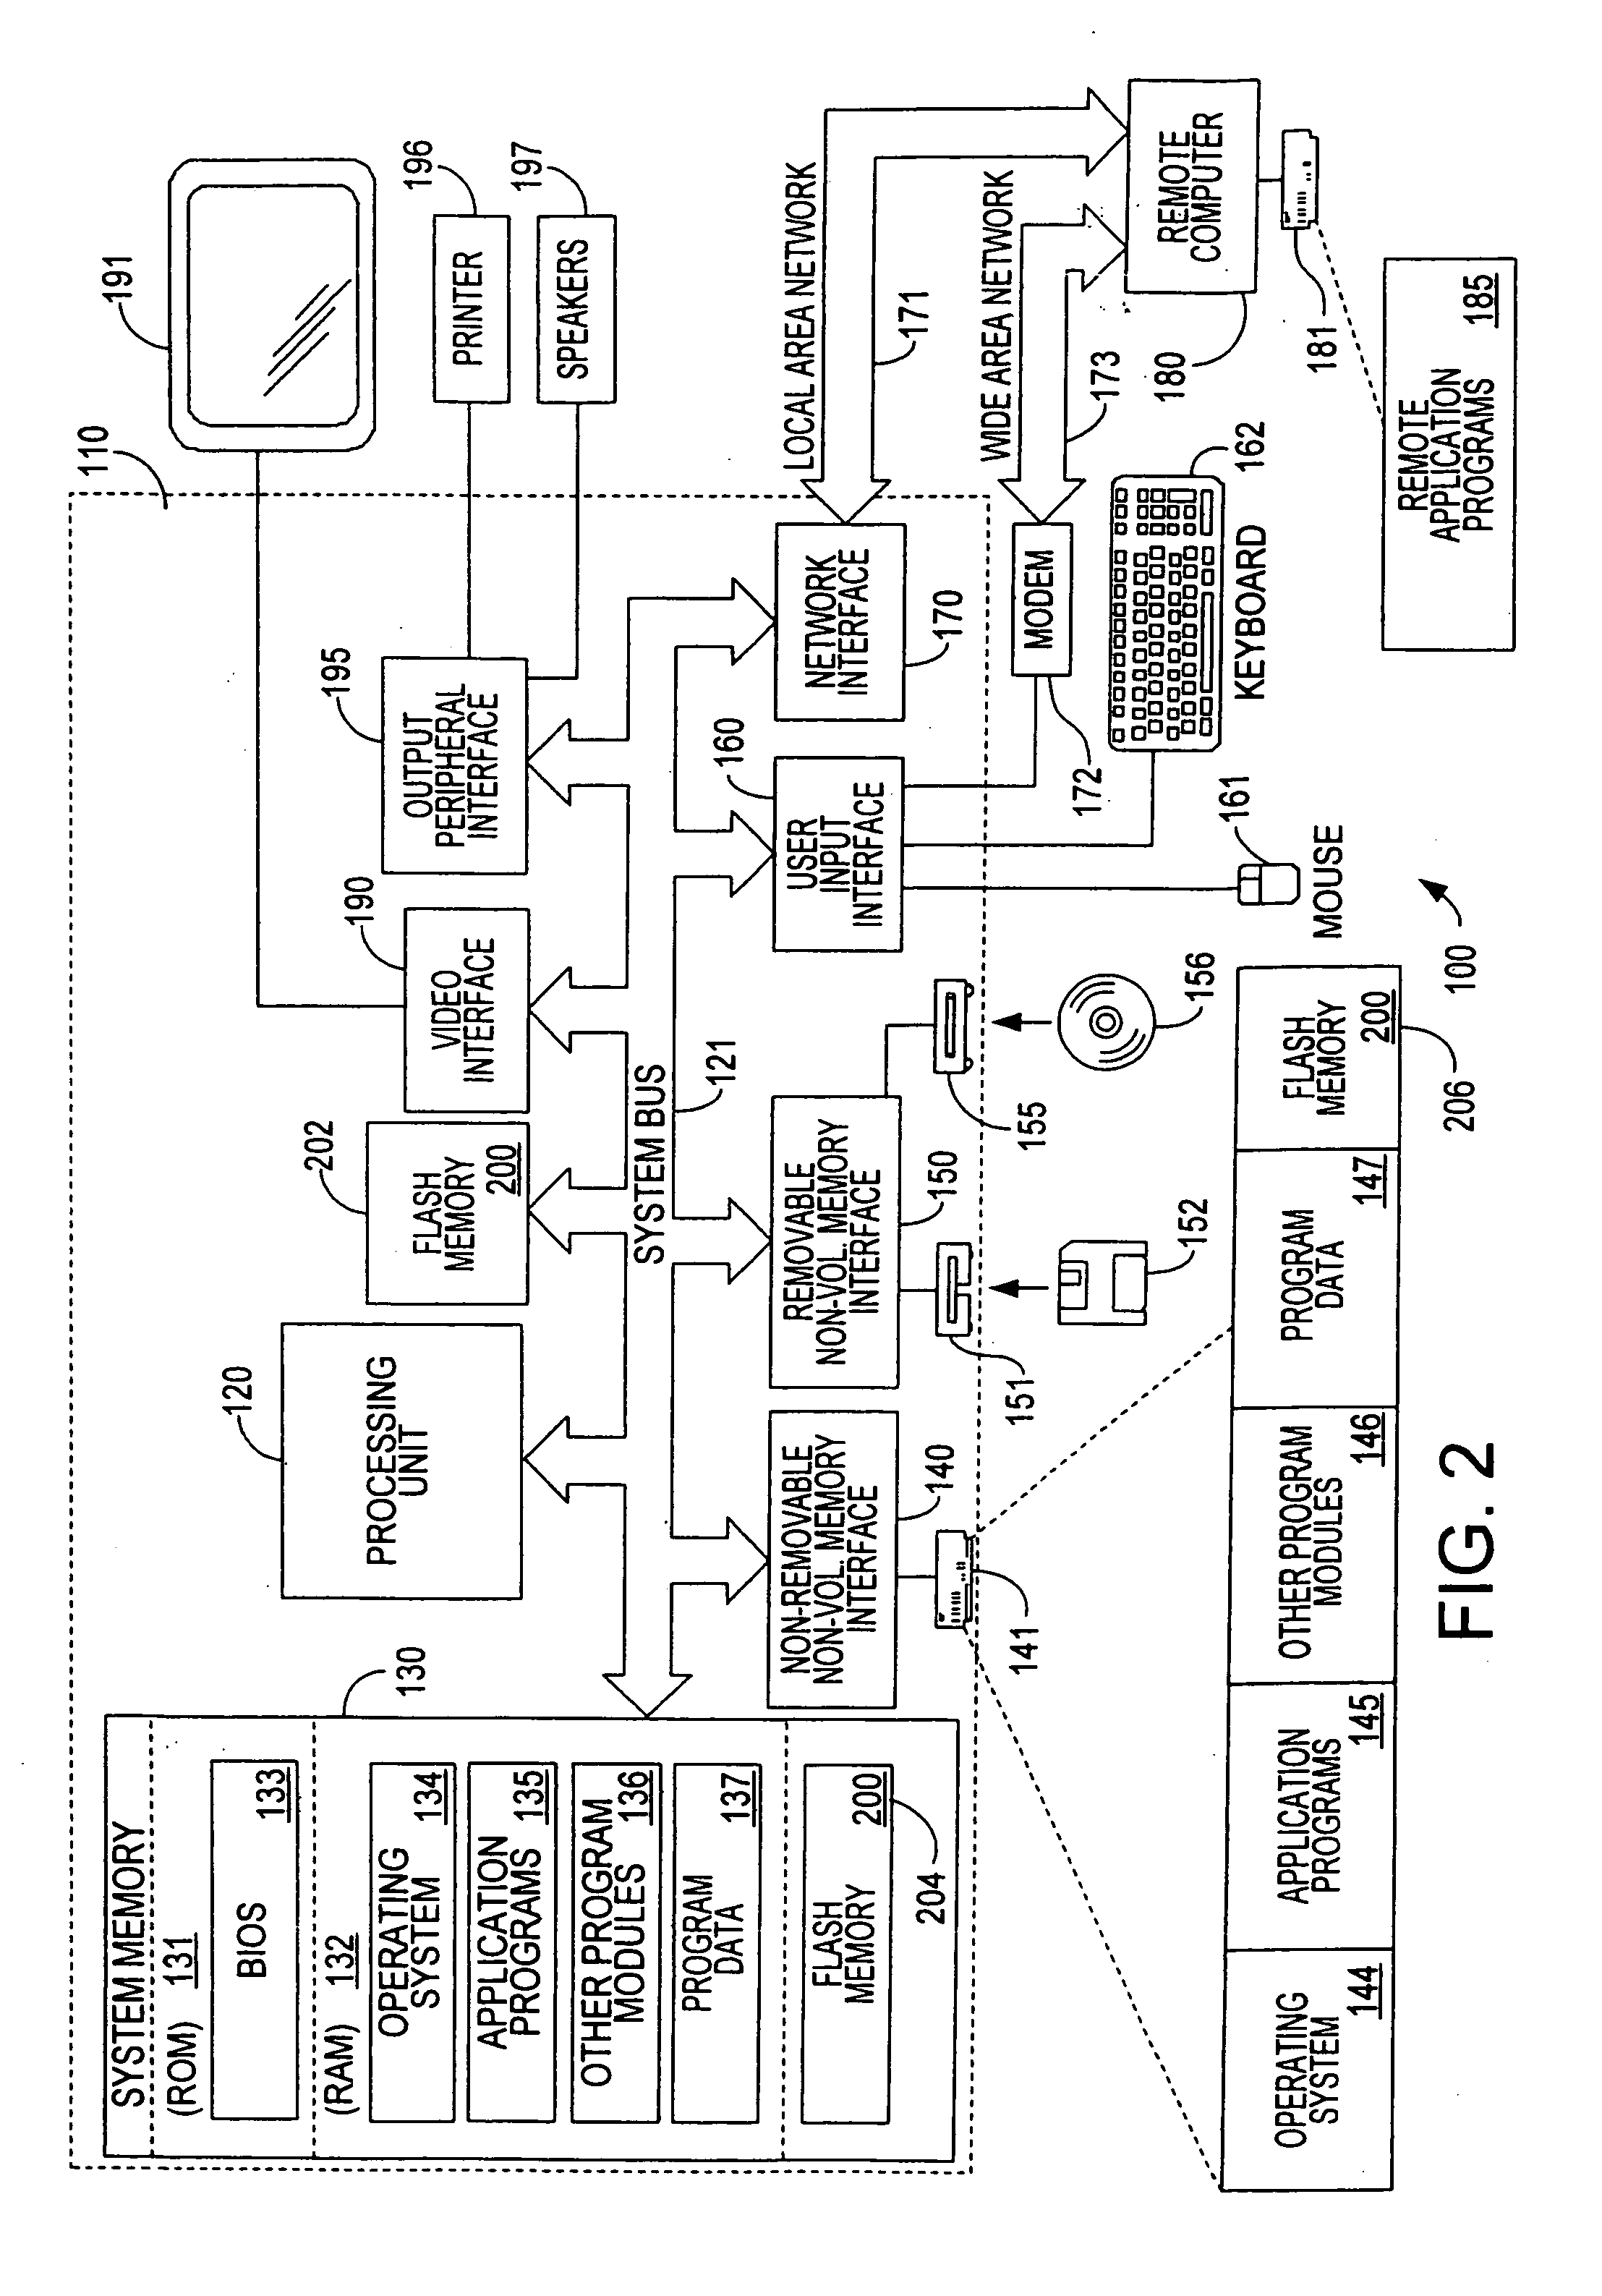 Apparatus and method to decrease boot time and hibernate awaken time of a computer system